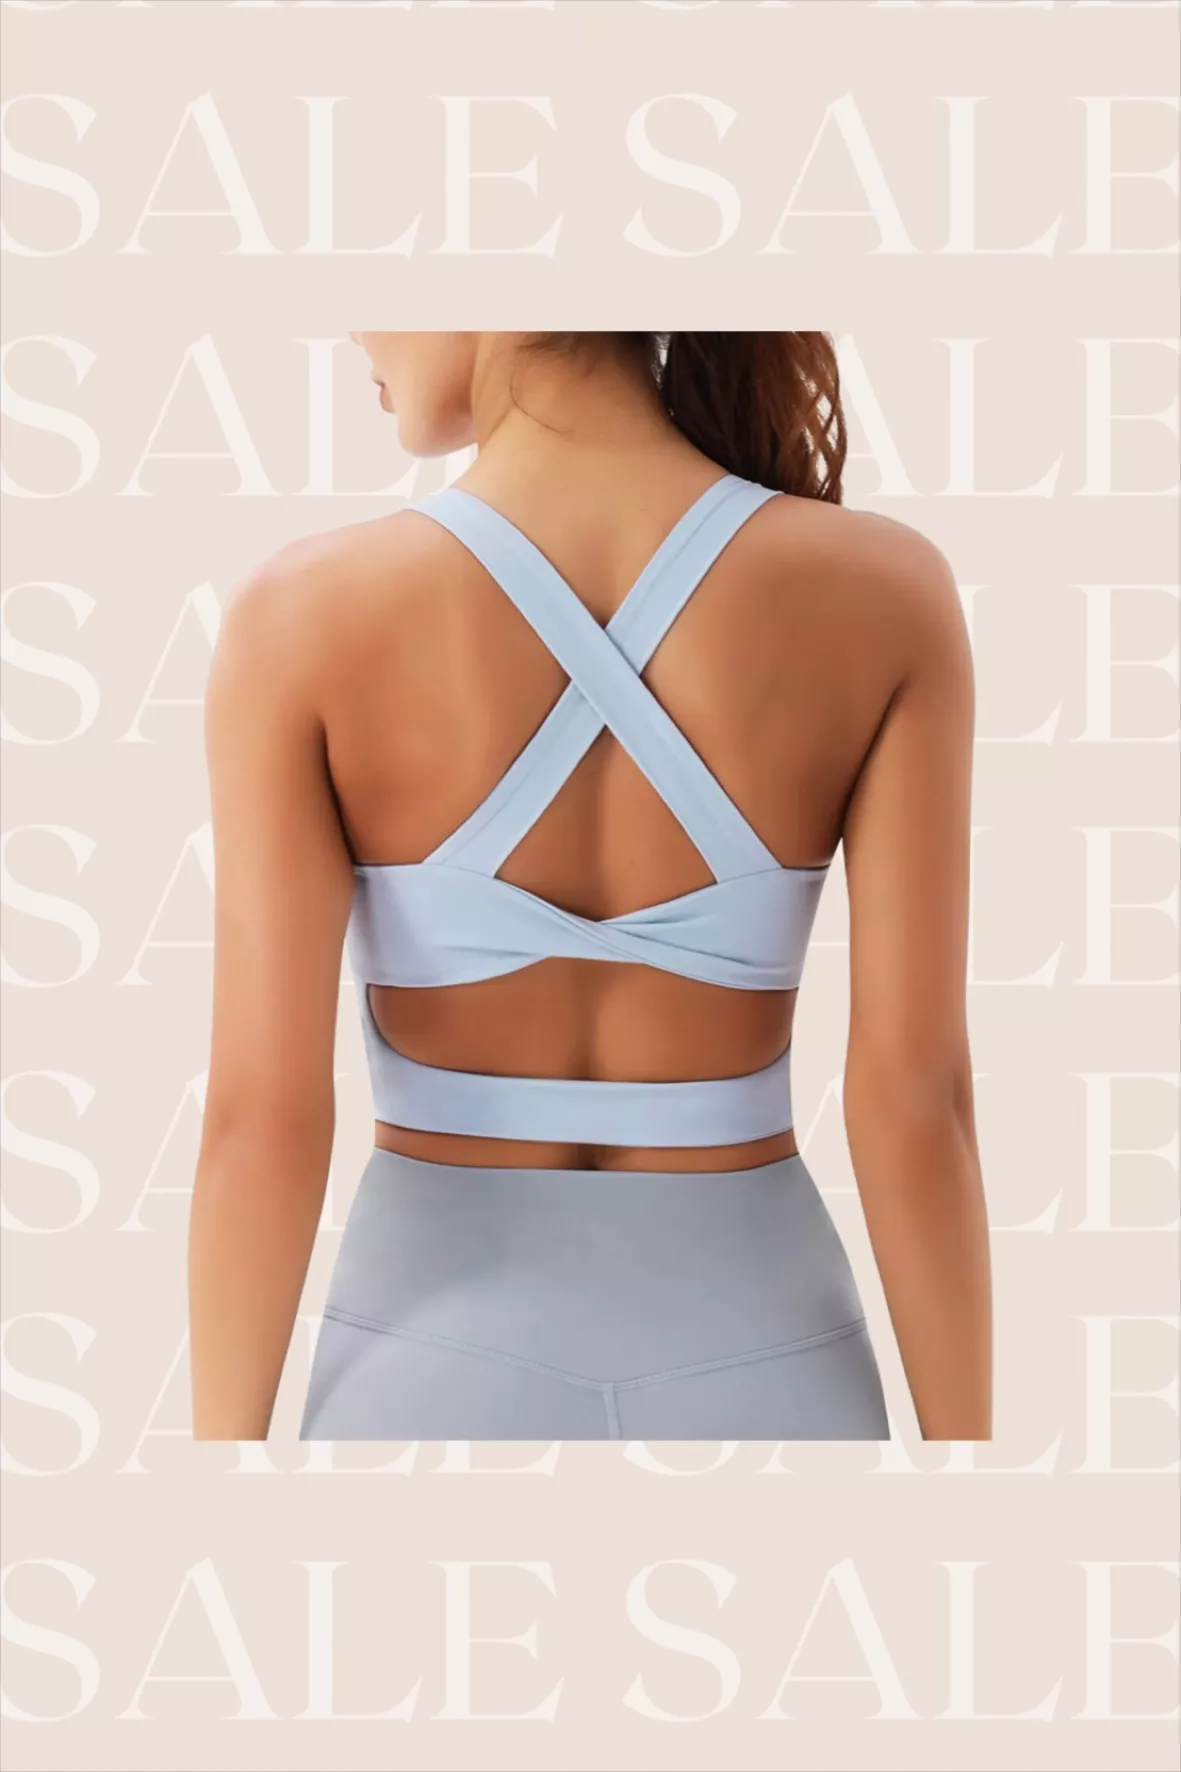 Sports Bras for Women Criss-Cross … curated on LTK